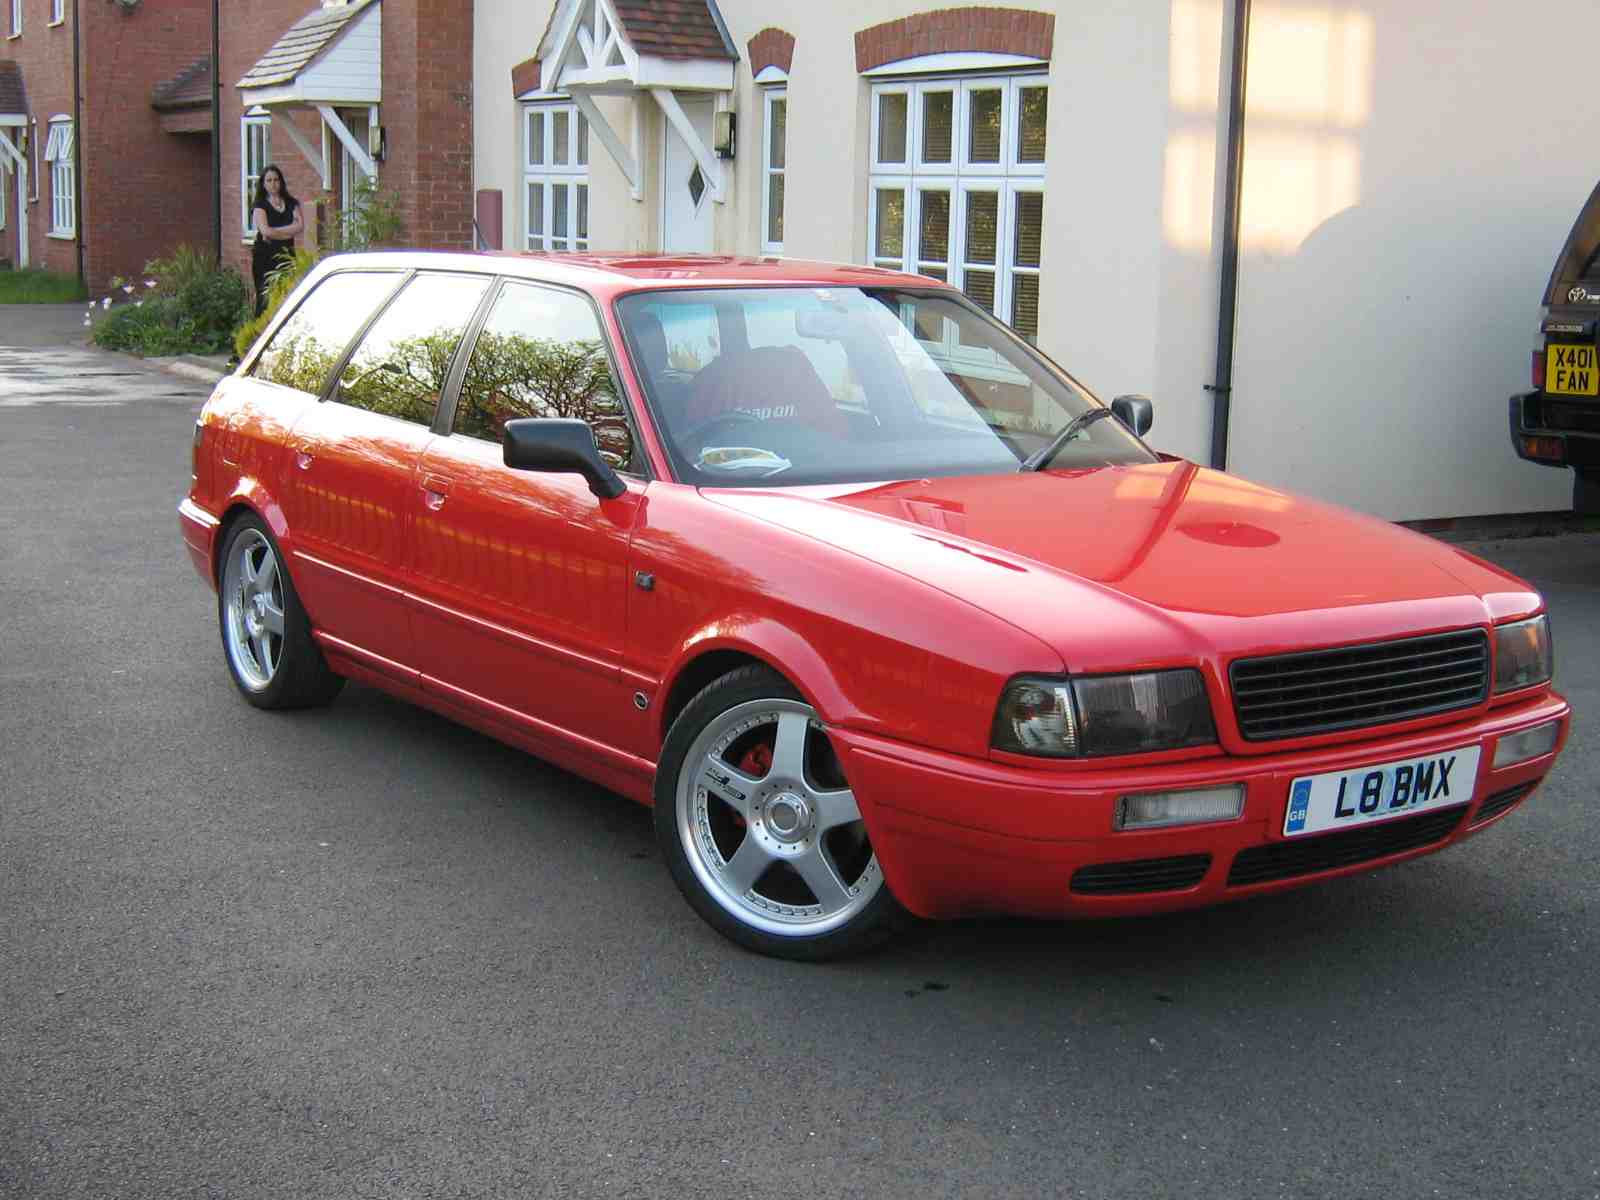 1988 Audi 80 Related Keywords &amp; Suggestions - 1988 Audi 80 Long Tail ...